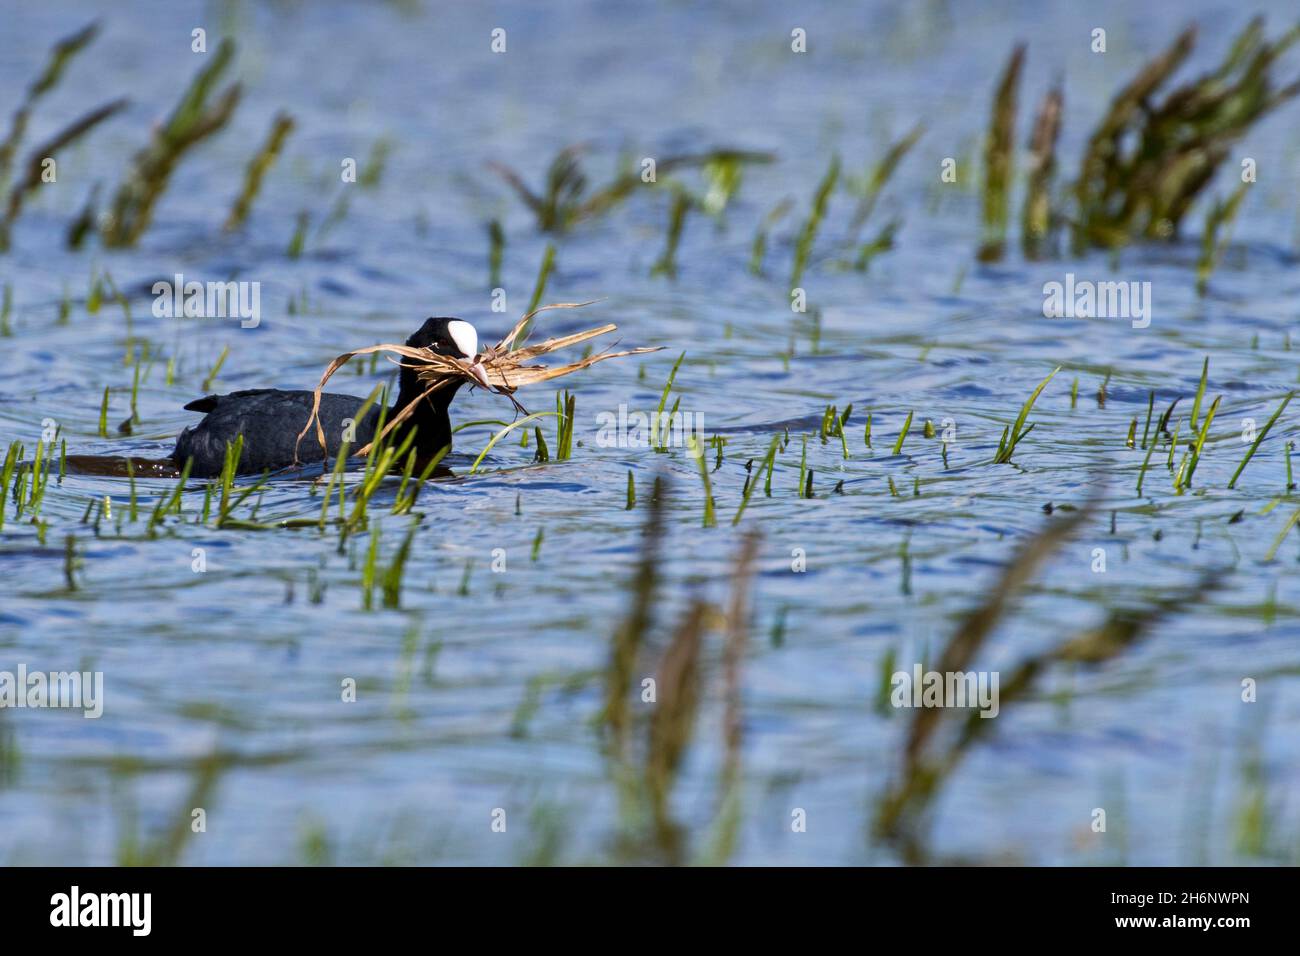 Common coot (Fulica atra) in the wetland collecting nesting material such as blades of grass for nest building in the breeding season Stock Photo